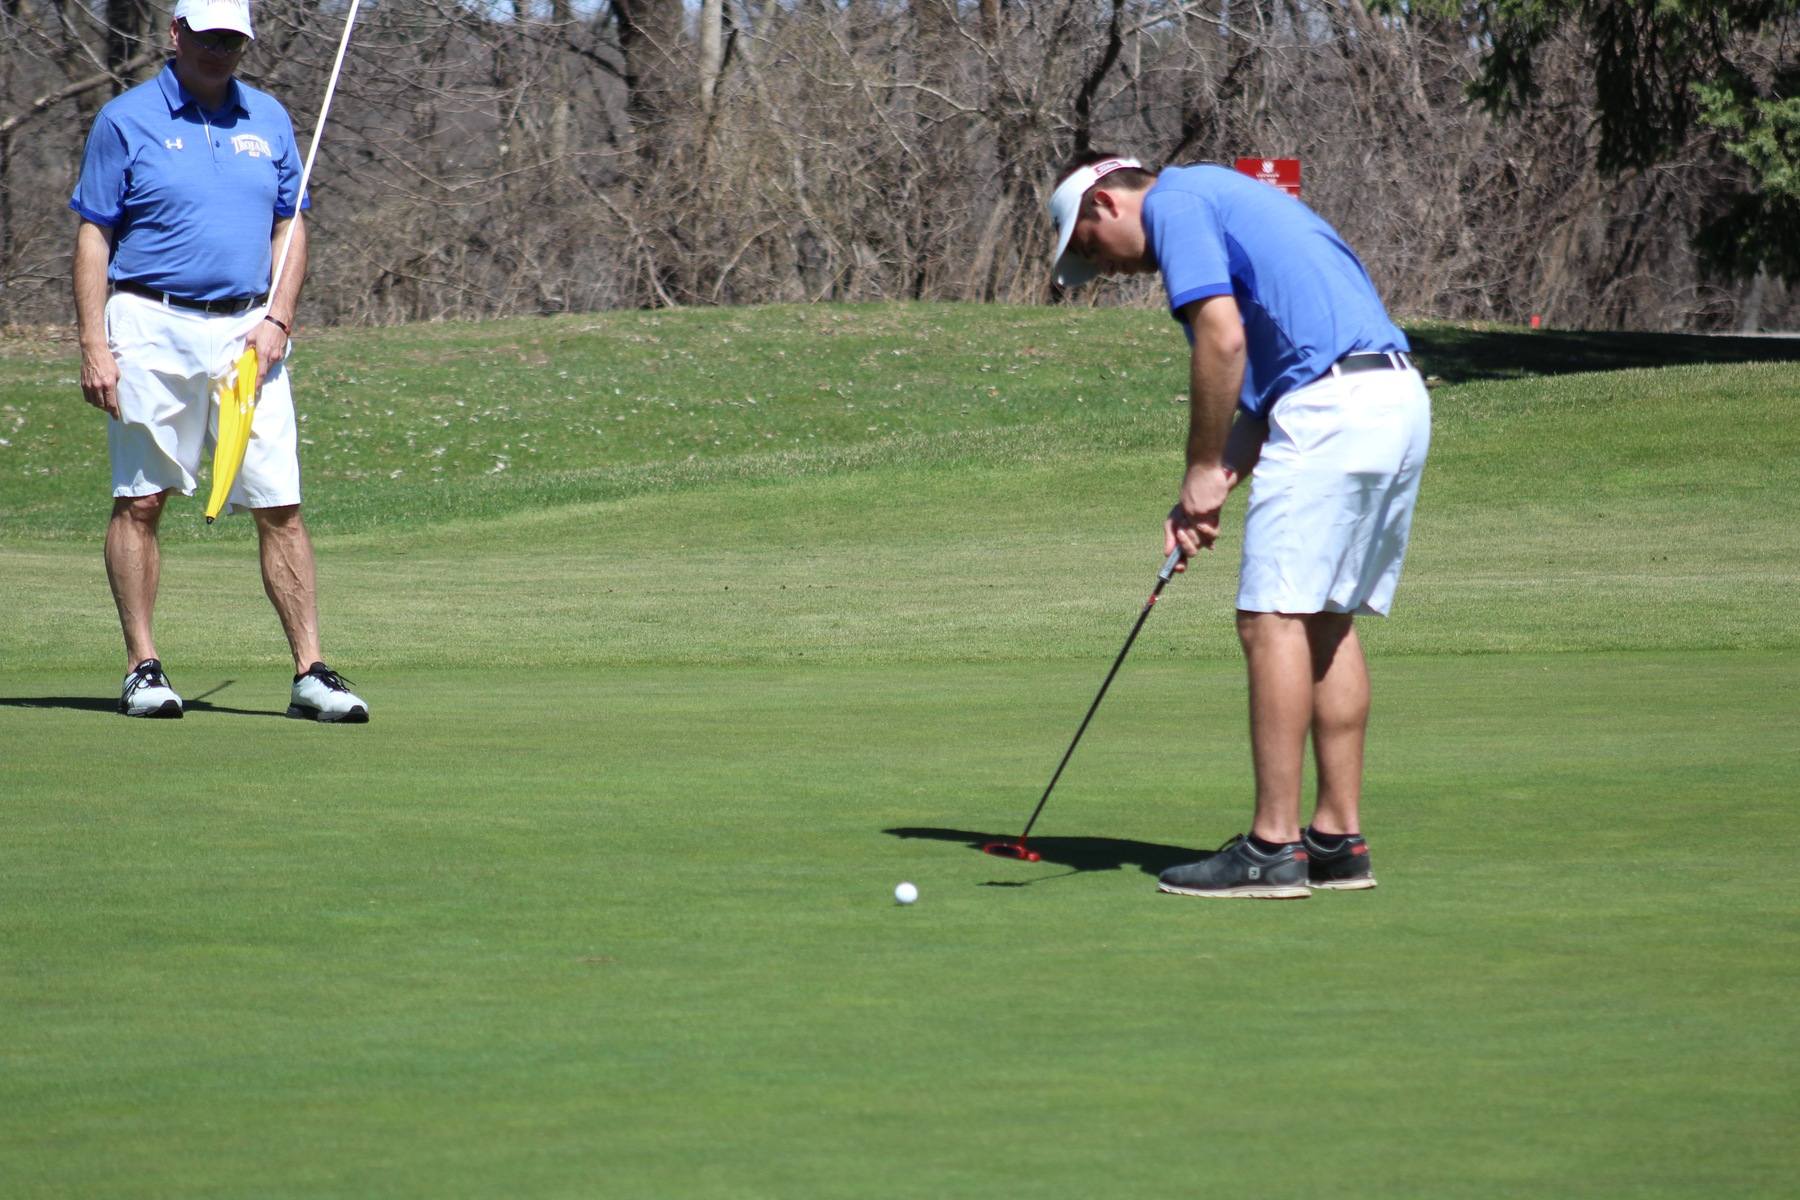 Austin Eckenrod led the Trojans with a 79 at Monday's retional preview tournament in Ames.